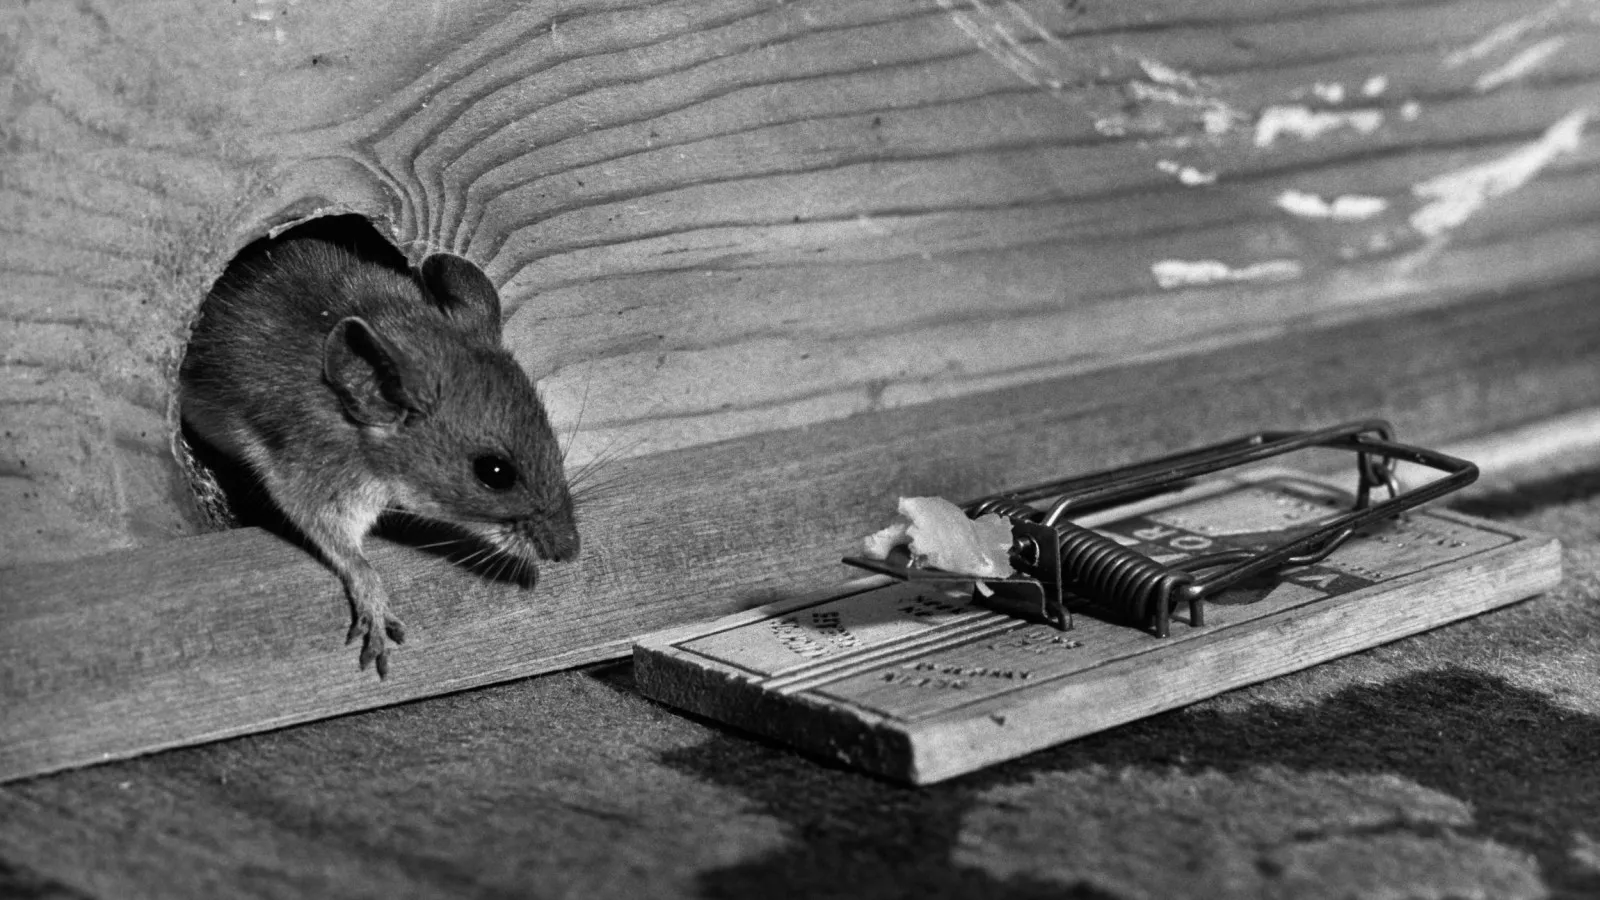 No, This Is Not a Cartoon, We Really Did Use 'Cannons' to Get Rid of Rodents  in the 19th Century